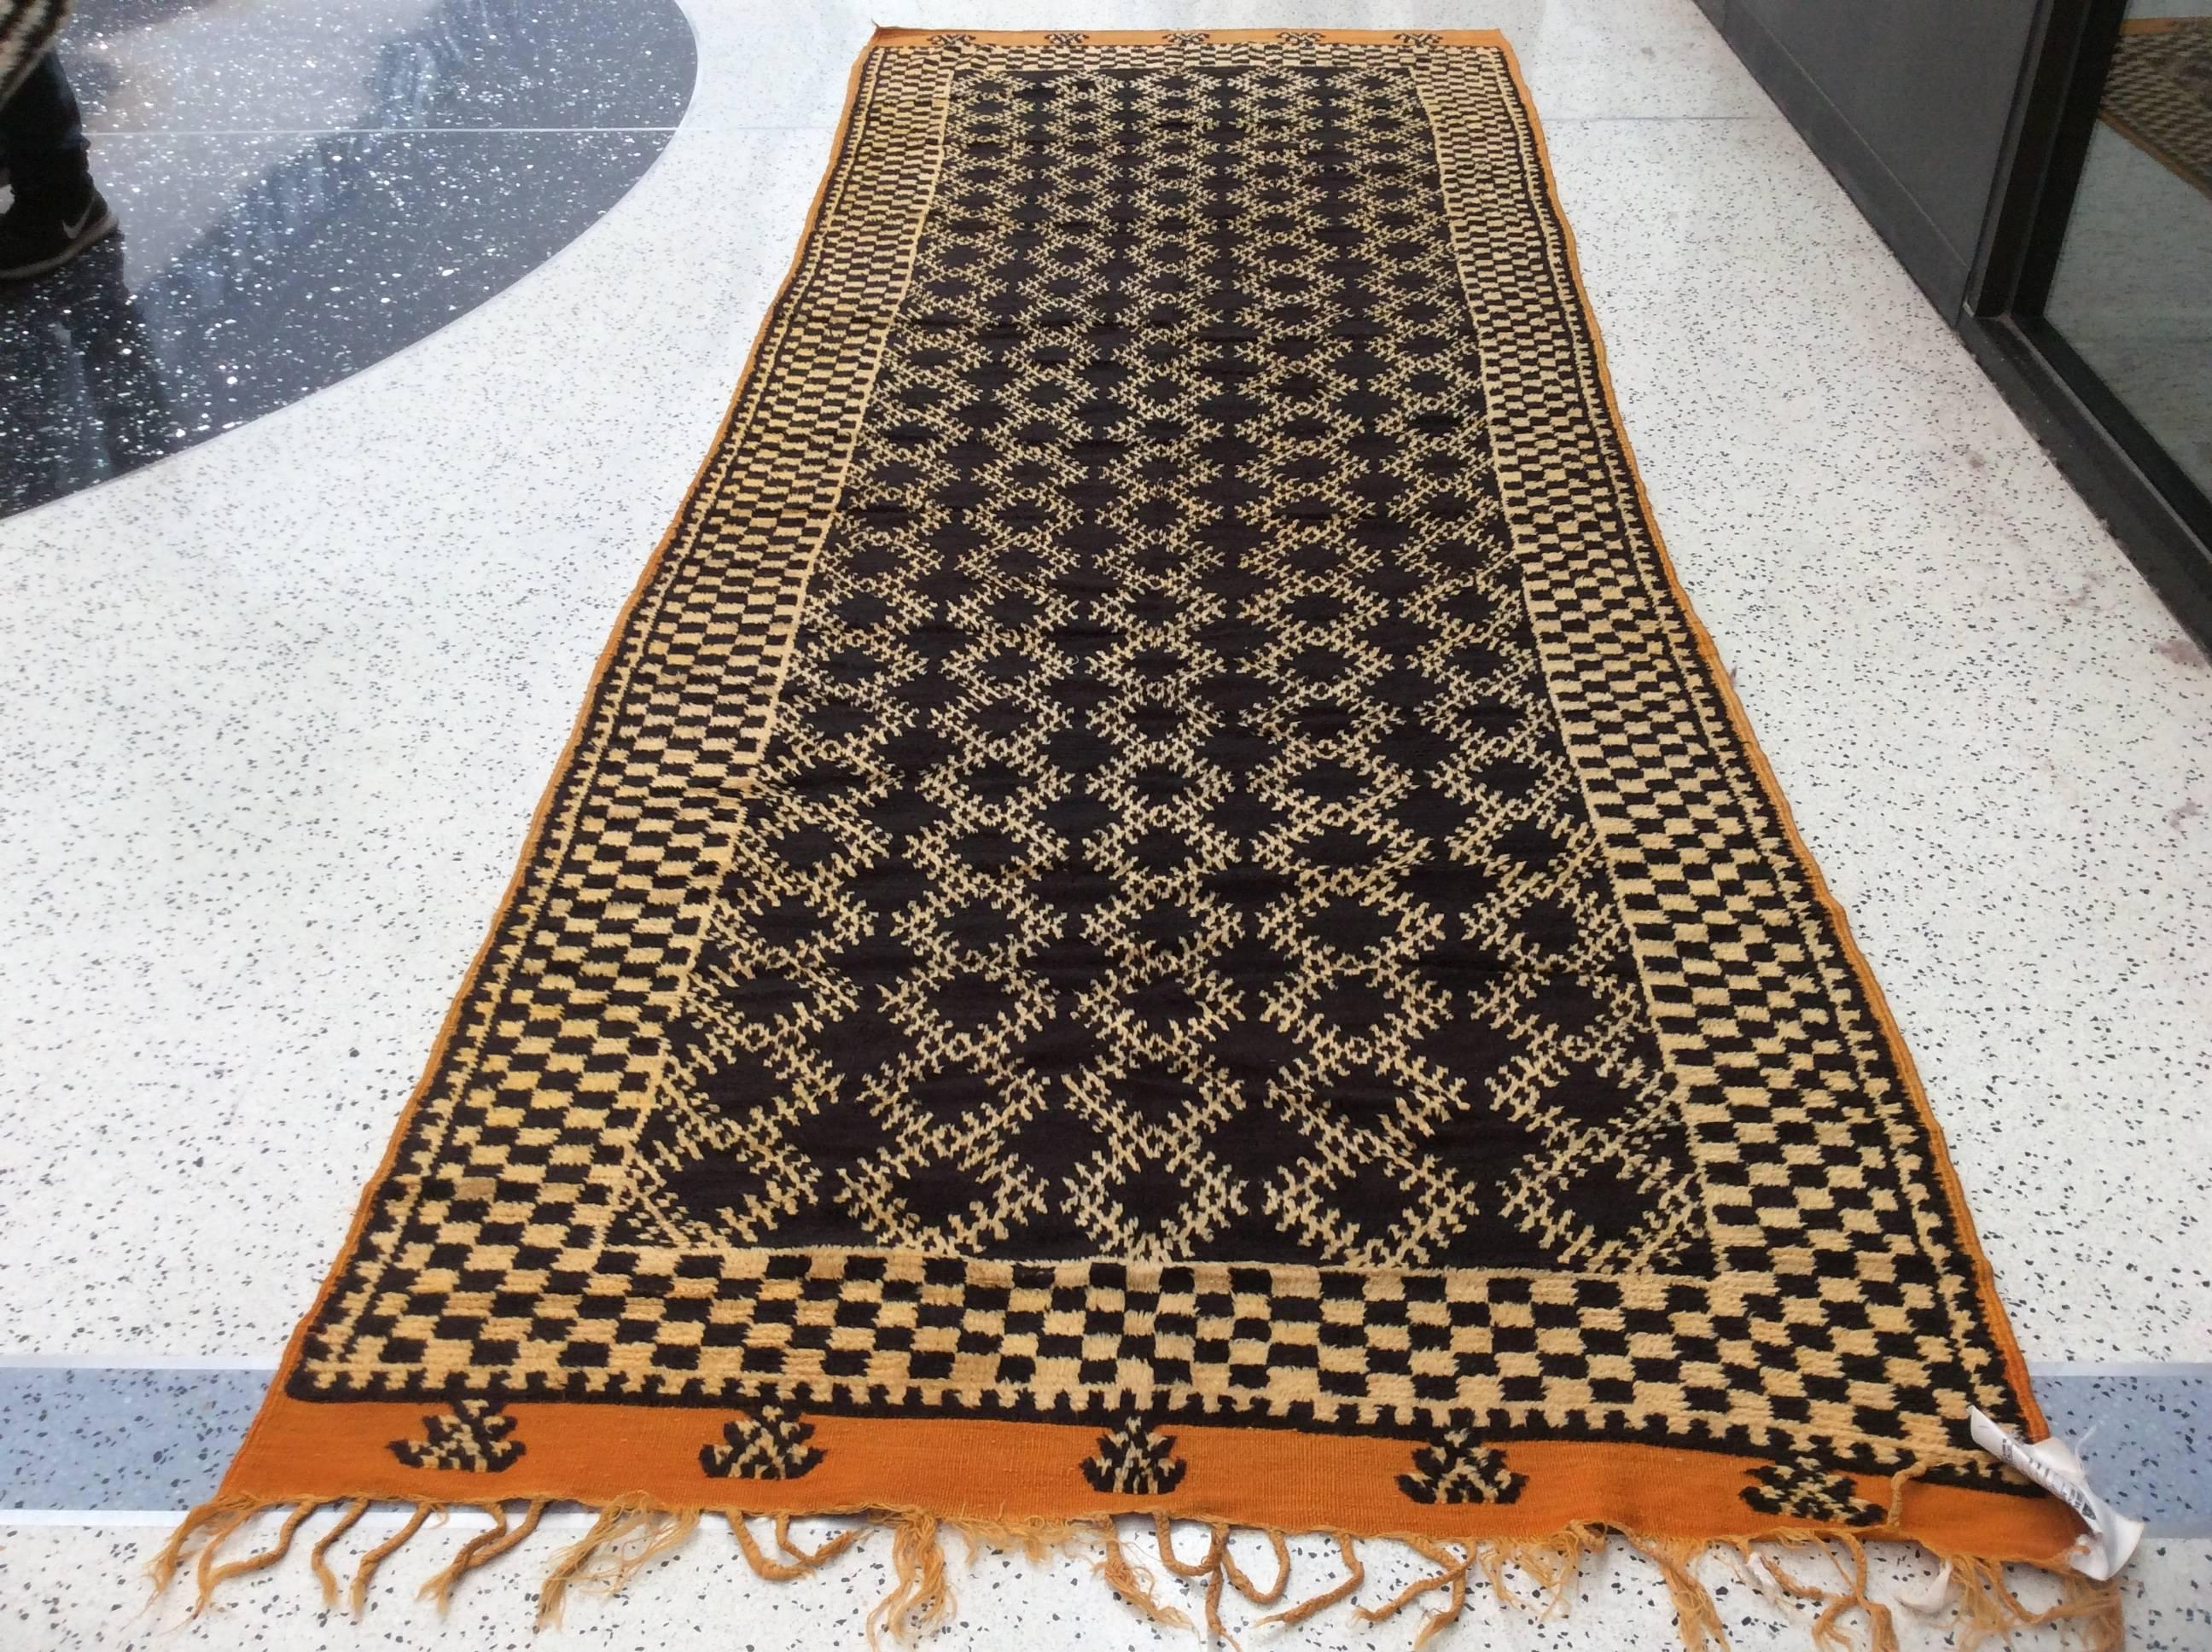 Moroccan runner

A weaving technique that has been passed down from generations to generations makes Moroccan Berber rug such a fine addition to your collection. It is made of luxurious hand-spun wool by the high atlas tribe, no two pieces are